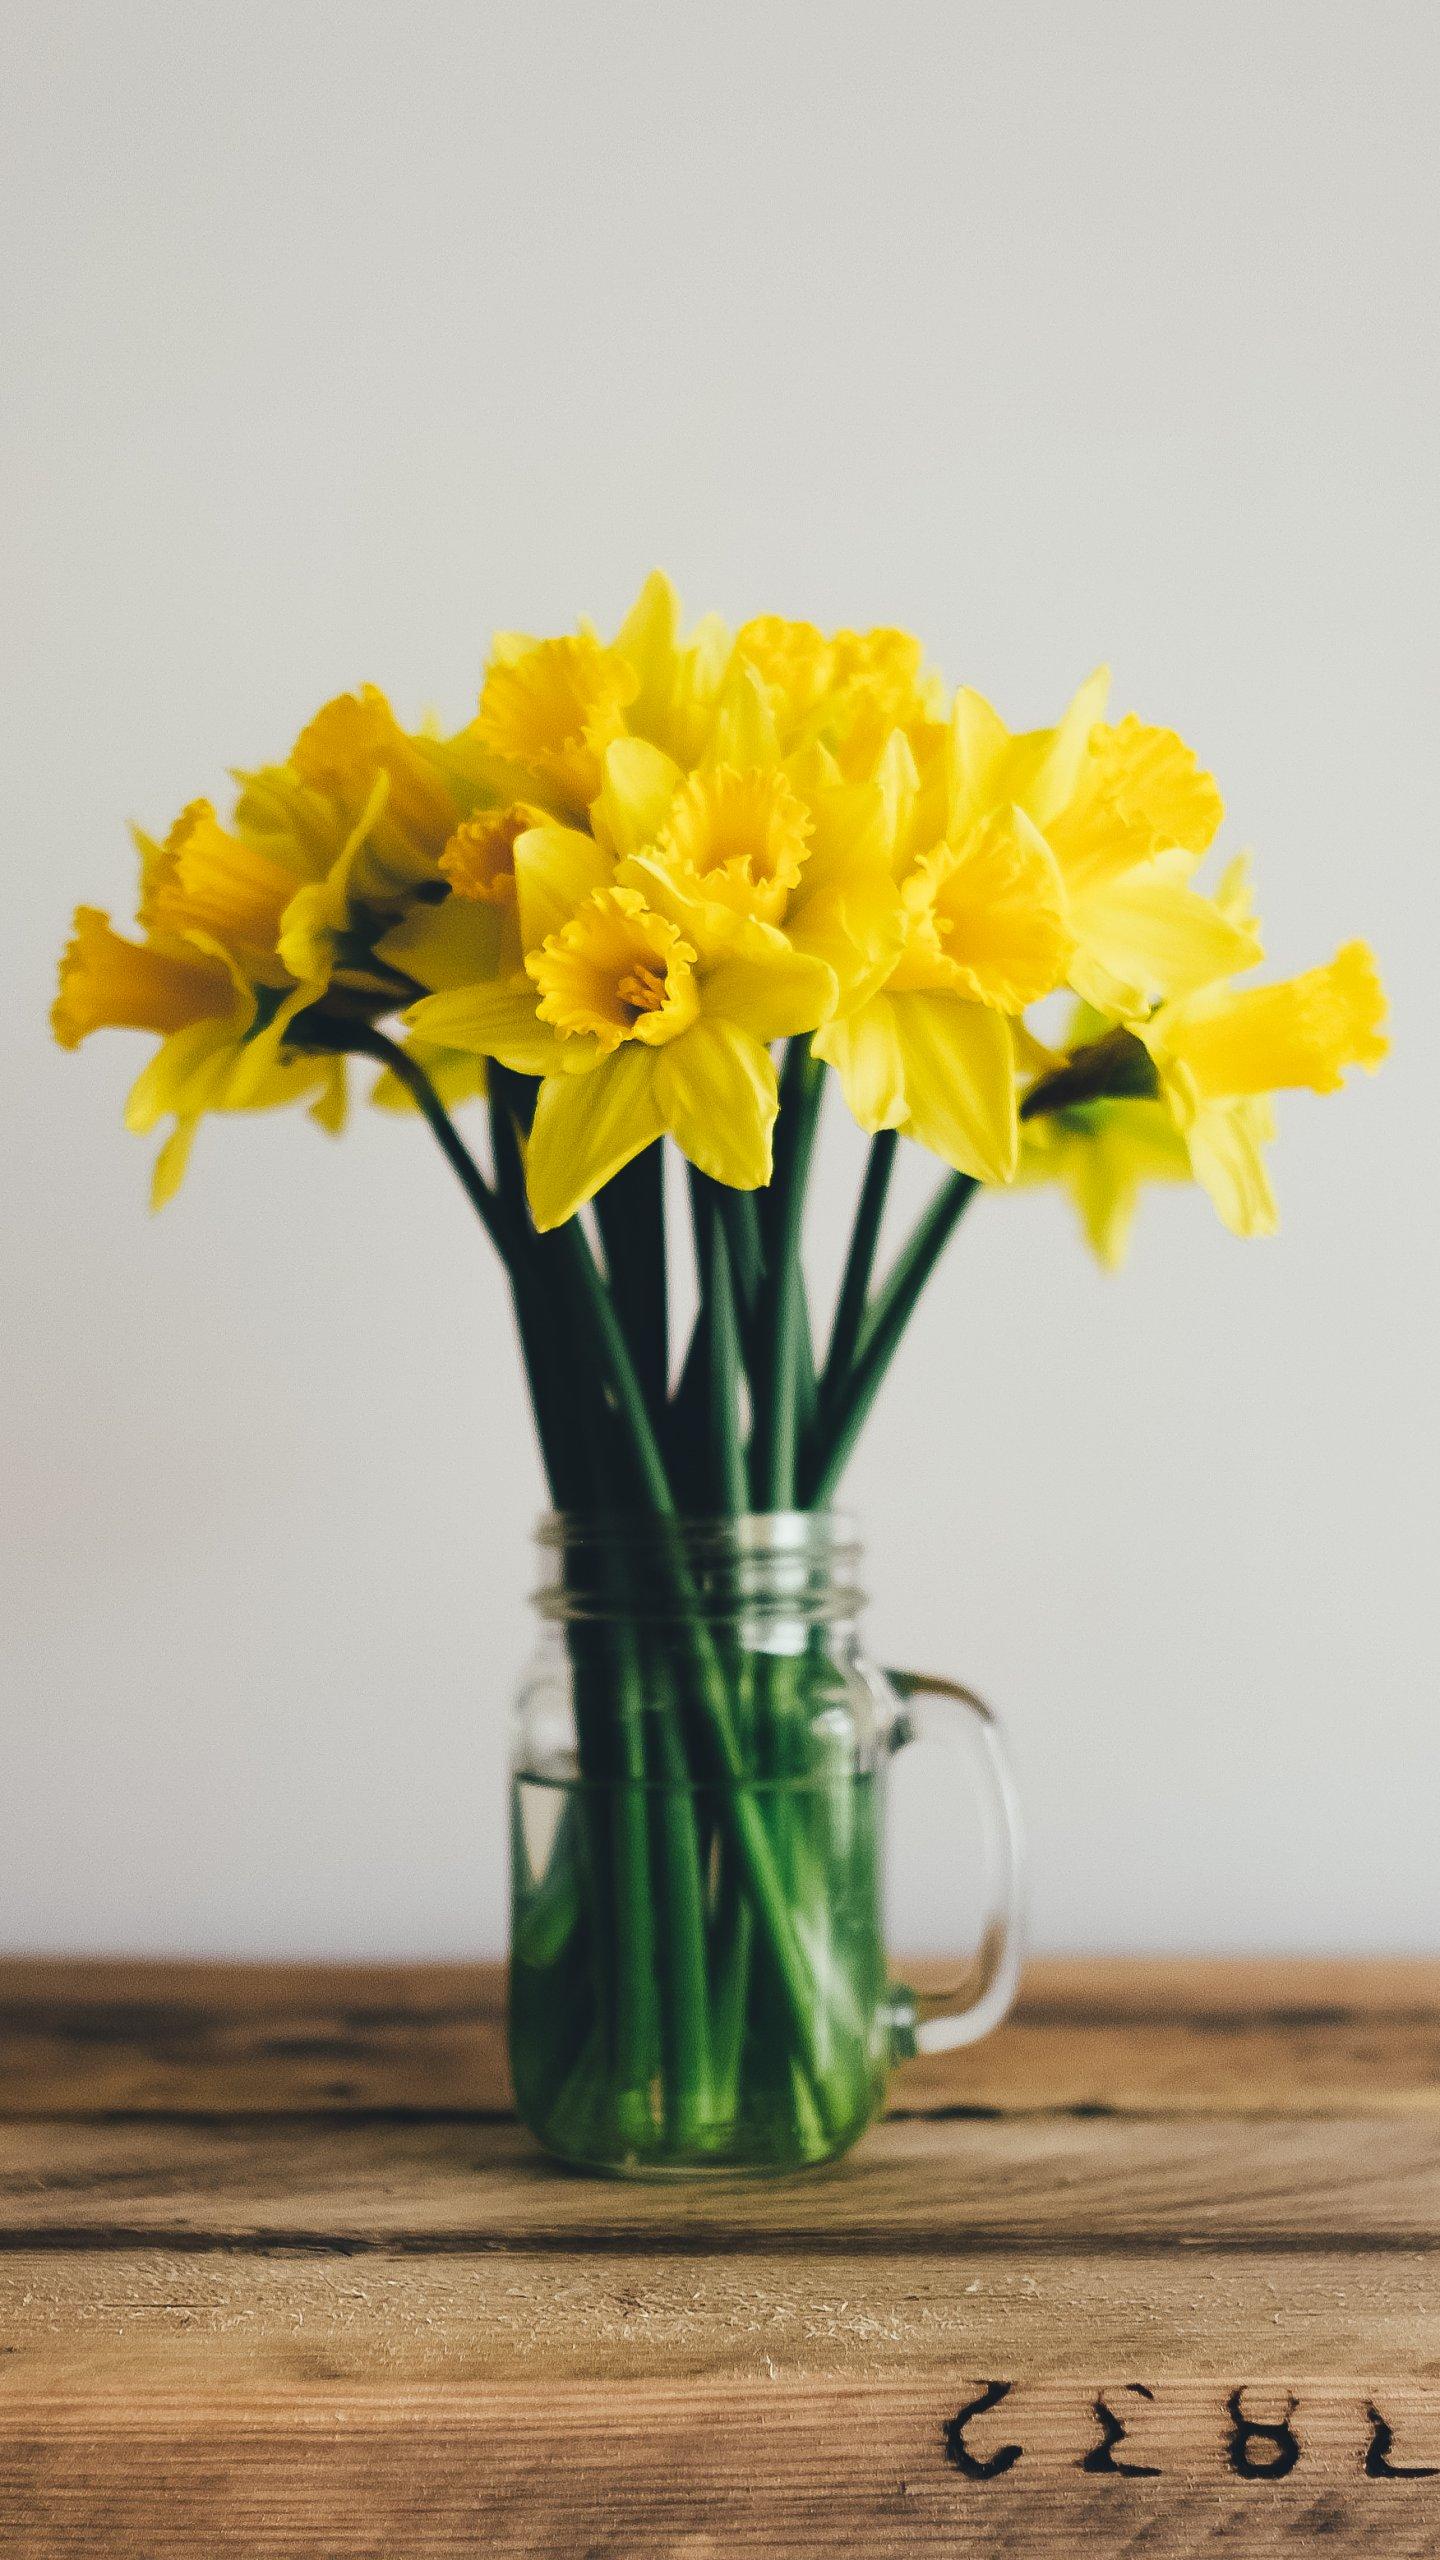 Daffodils Wallpaper, Android & Desktop Background